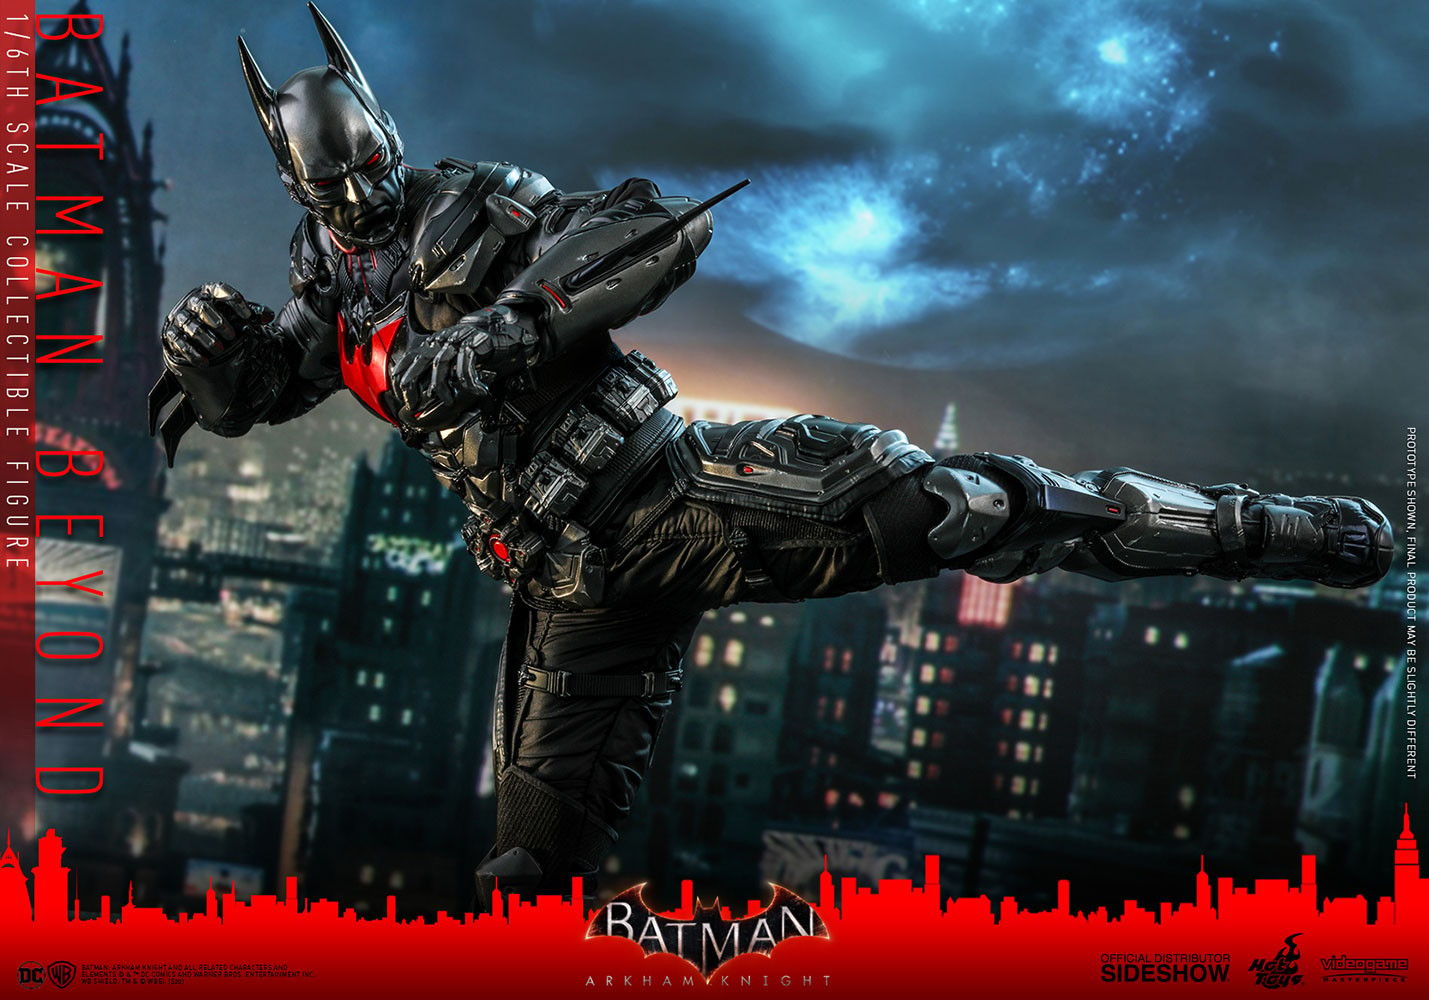 Batman Beyond Sixth Scale Figure by Hot Toys | Sideshow Collectibles